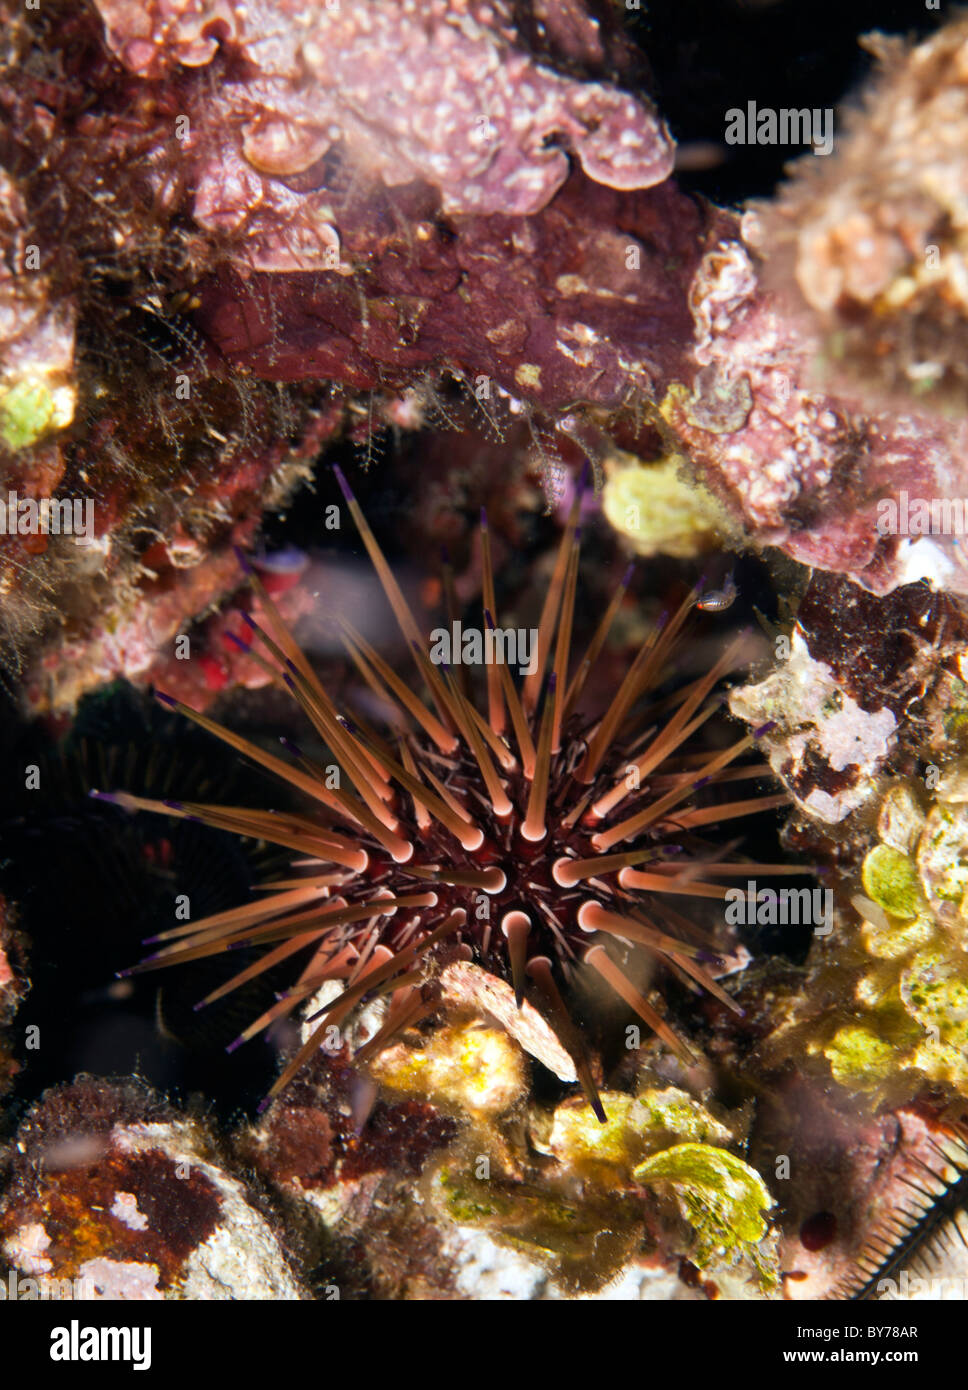 Reef Urchin in crevice at night at coral reef Stock Photo